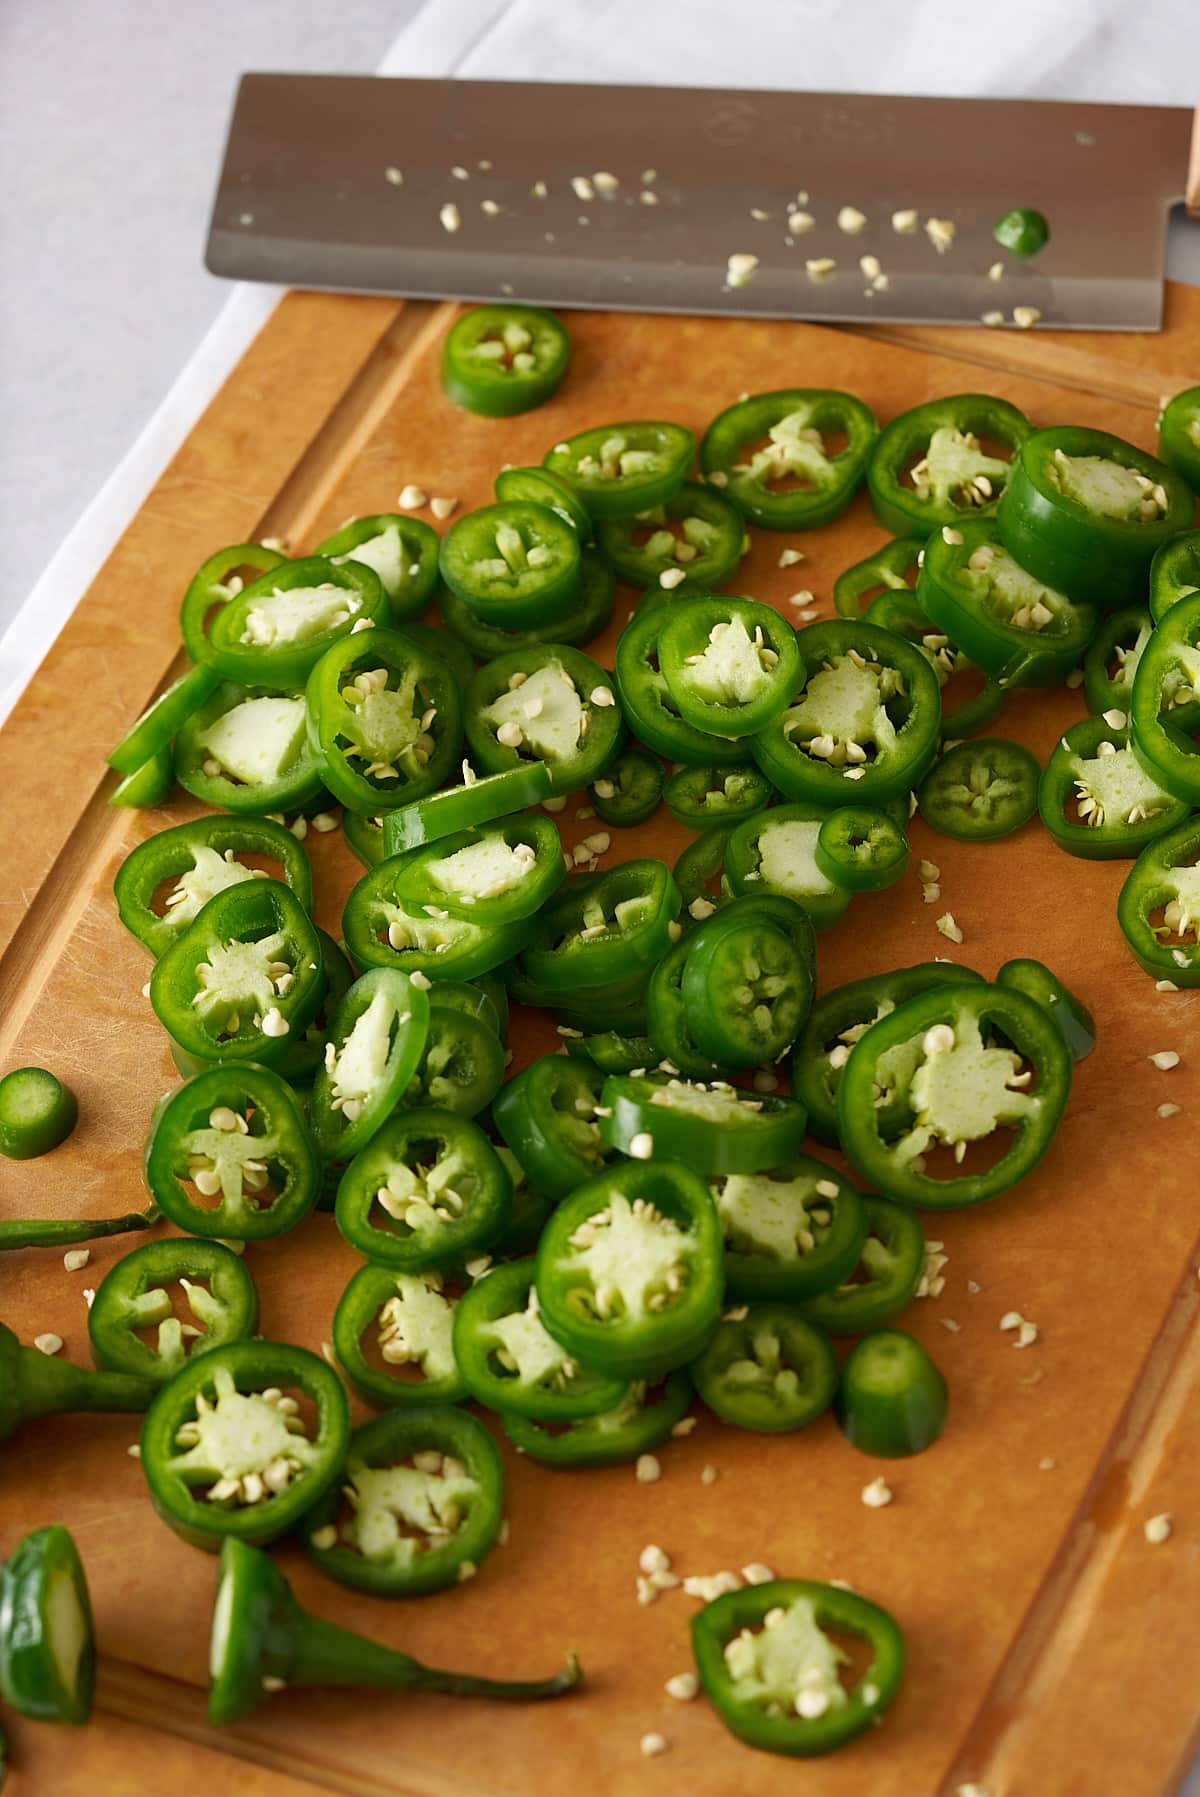 Fresh jalapenos cut into slices on a cutting board.